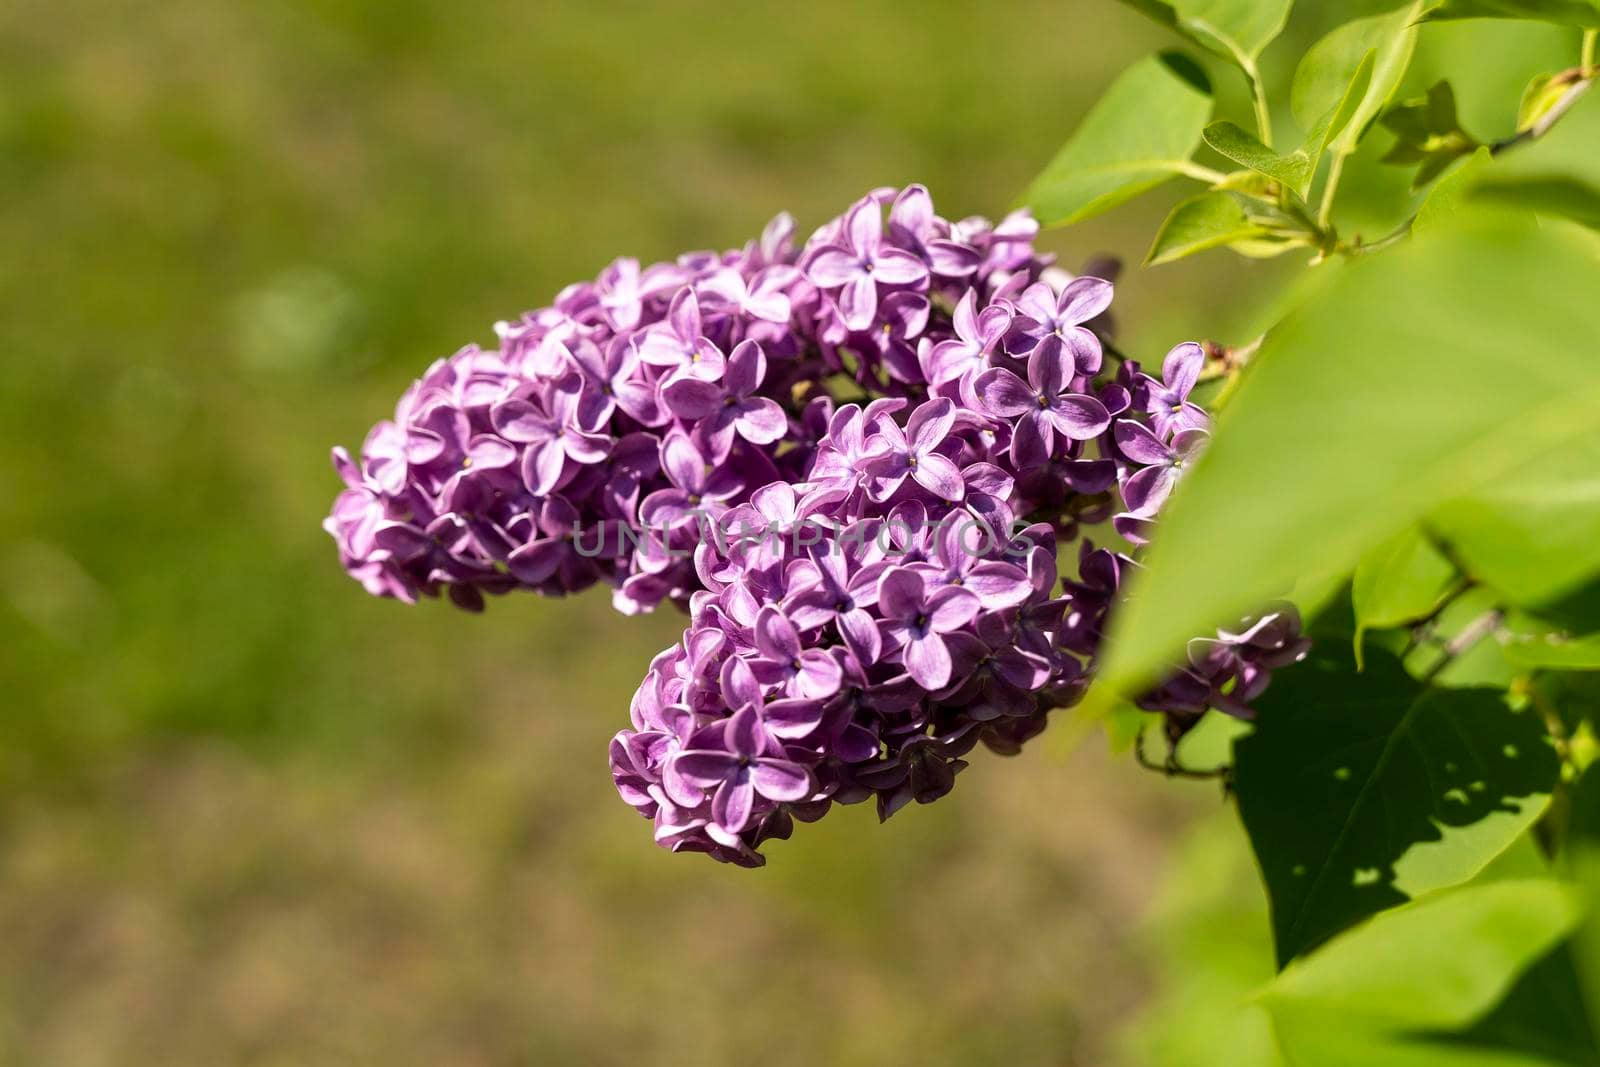 lovely fresh branches of lilac flowers on a background of green leaves by audiznam2609